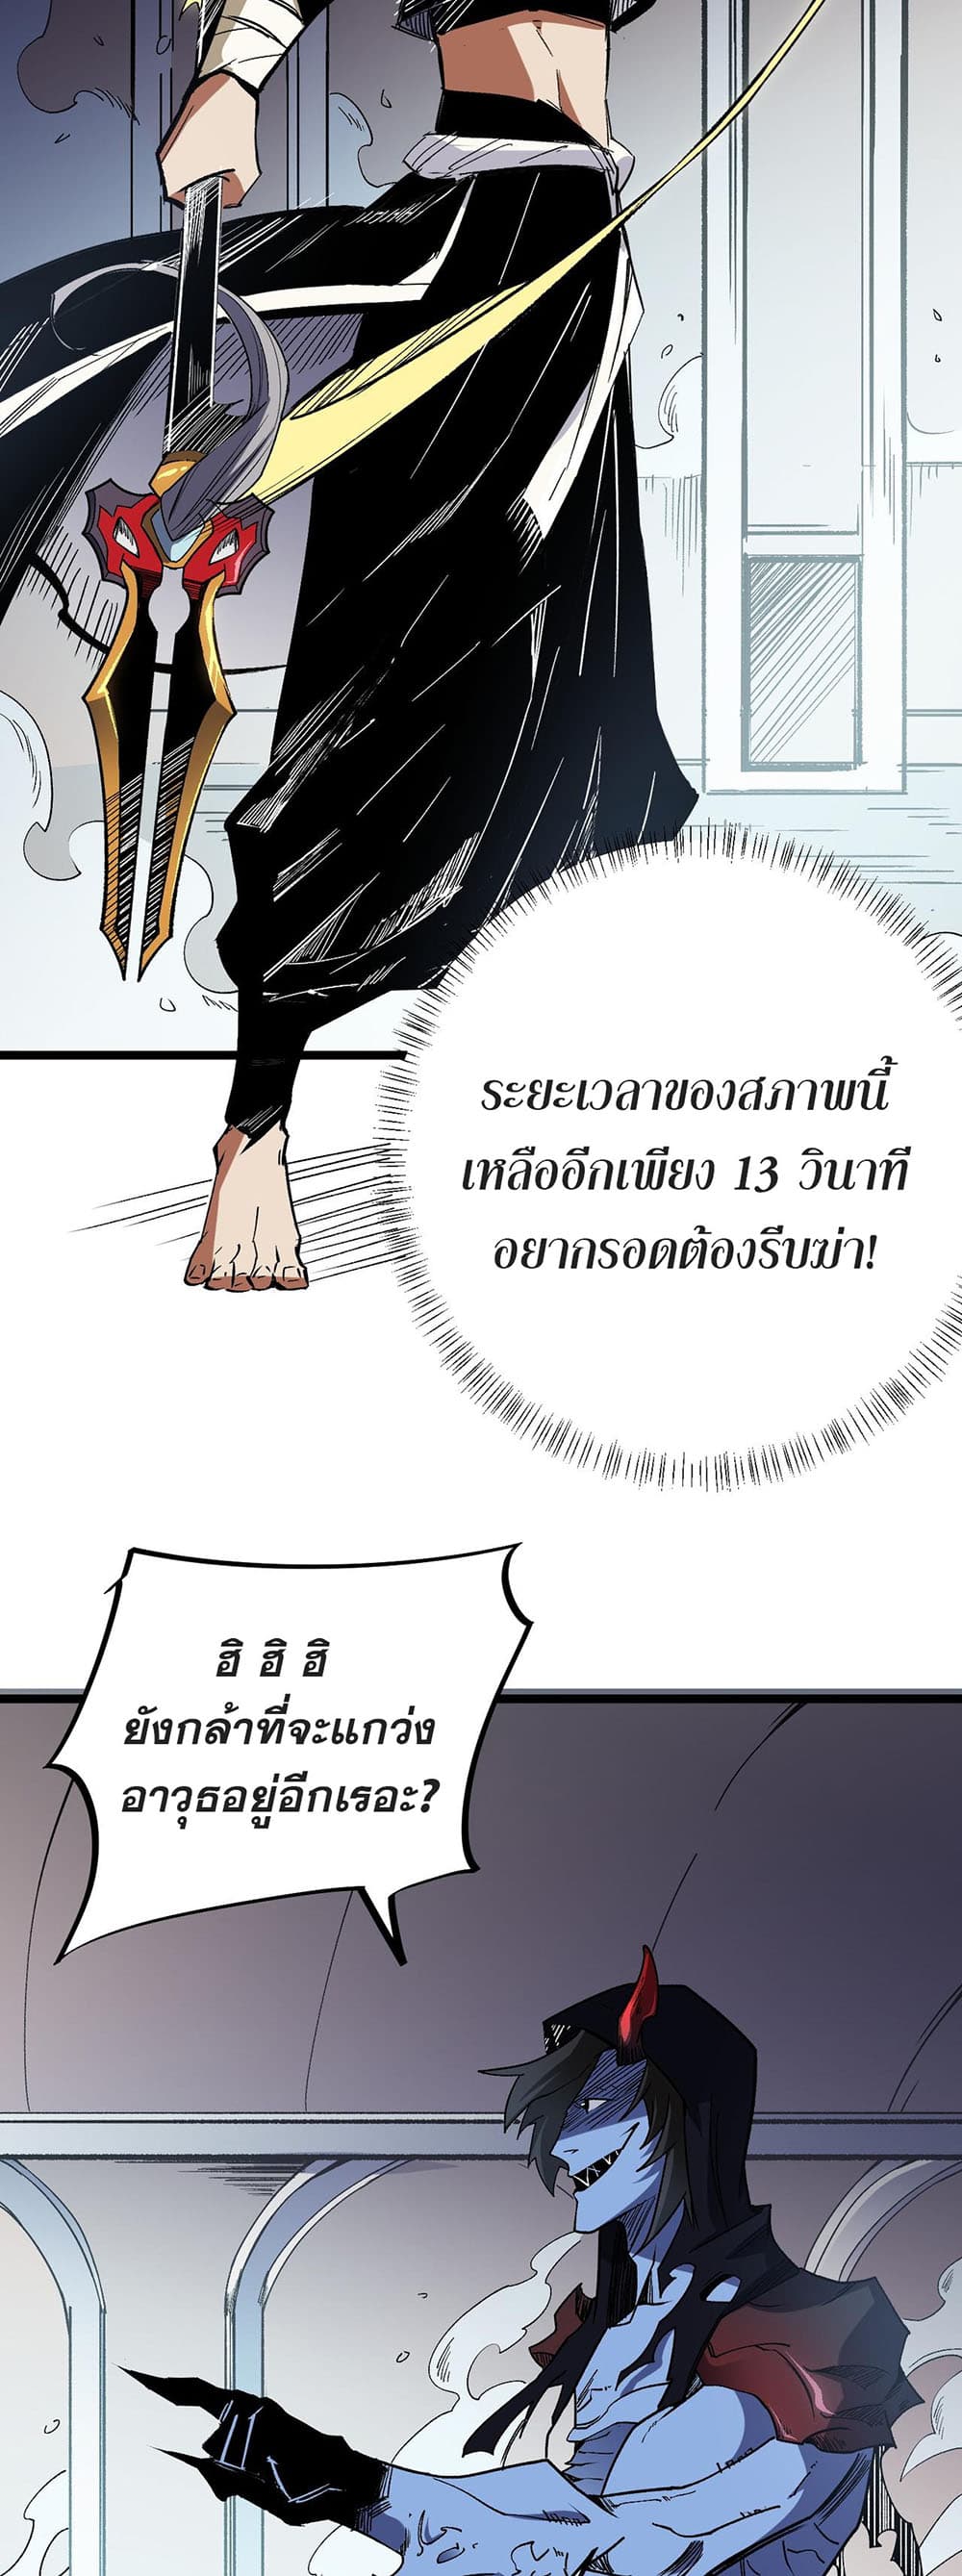 Job Changing for the Entire Population: The Jobless Me Will Terminate the Gods ฉันคือผู้เล่นไร้อาชีพที่สังหารเหล่าเทพ 53-53